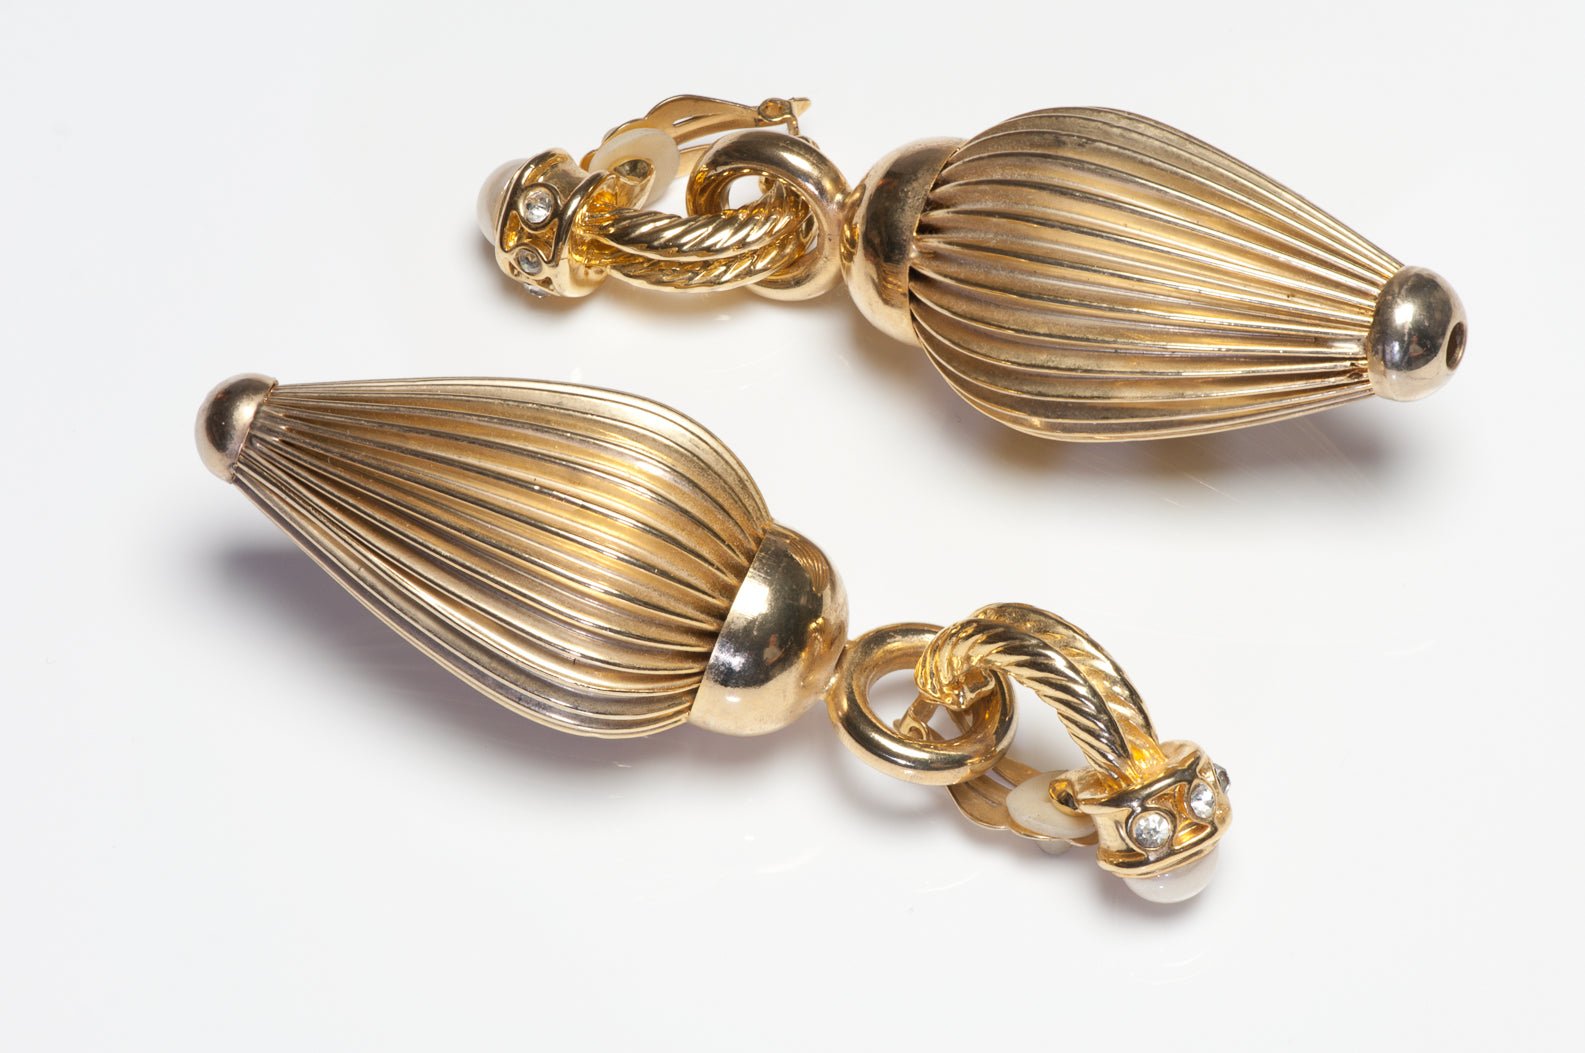 Vintage 1980's Long Gold Plated Crystal Textured Drop Earrings